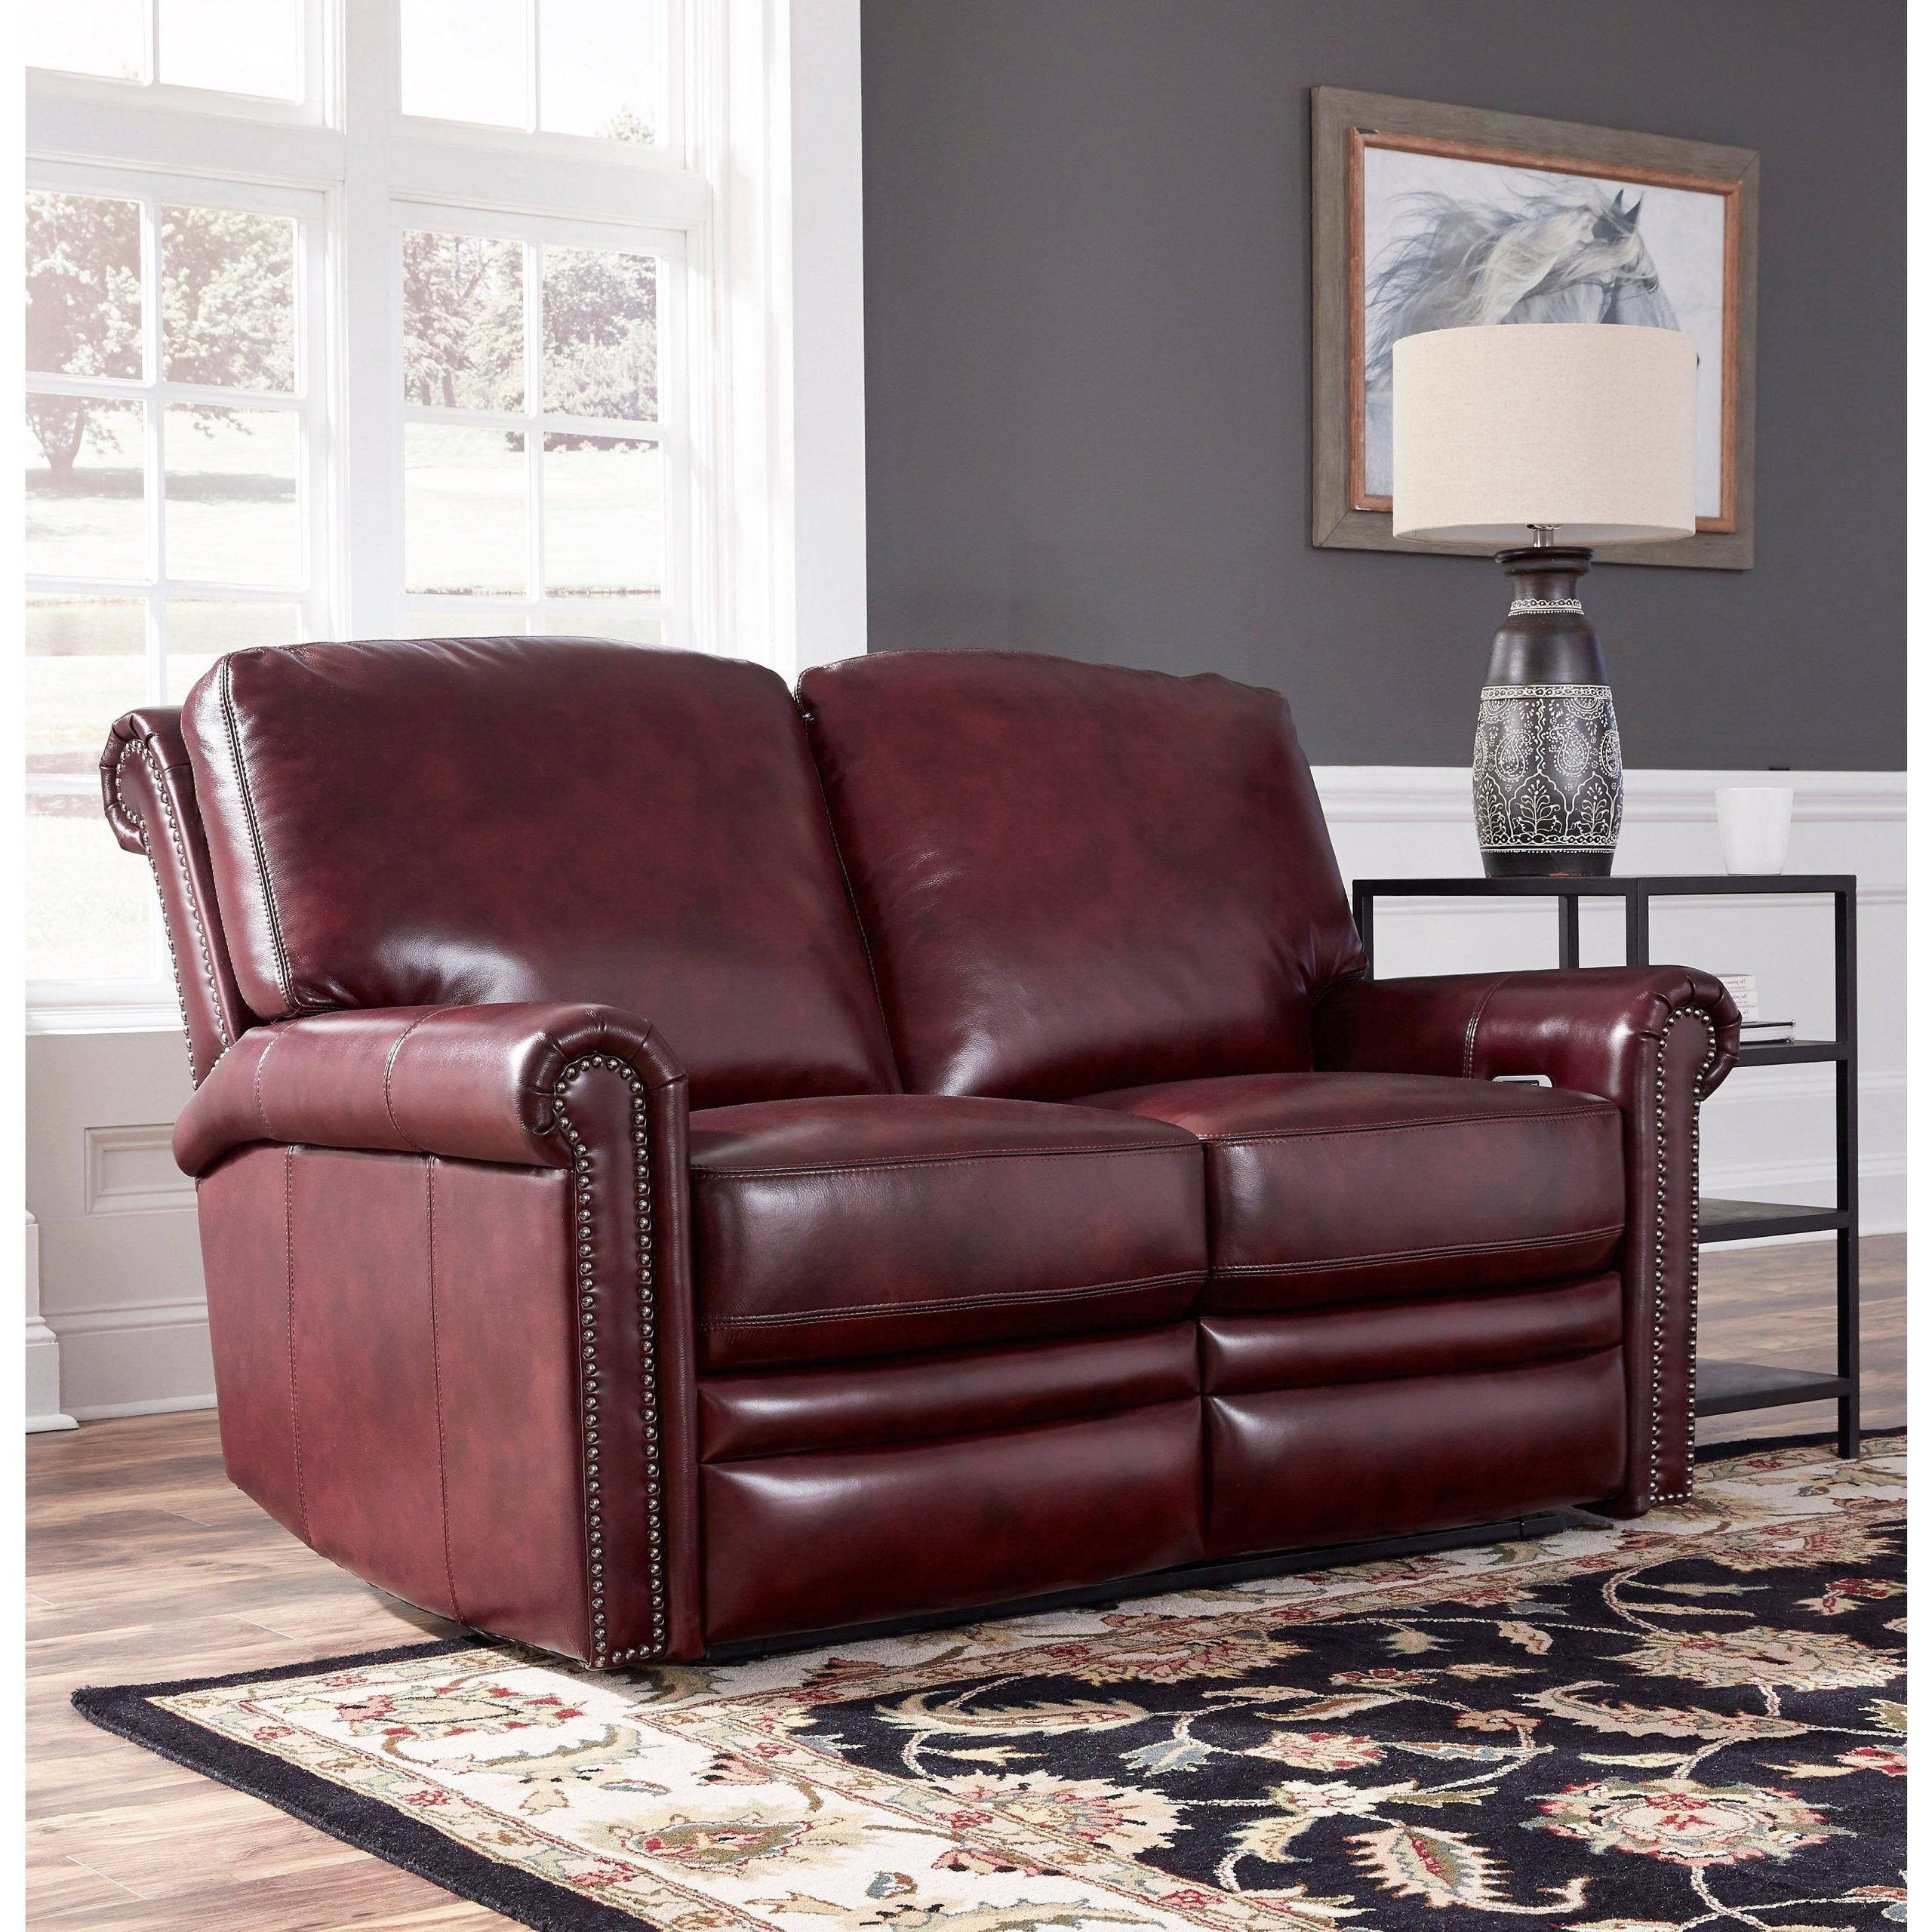 Port Burgundy Red Top Grain Leather Power Reclining Loveseat – Bed Bath Pertaining To Top Grain Leather Loveseats (View 5 of 20)